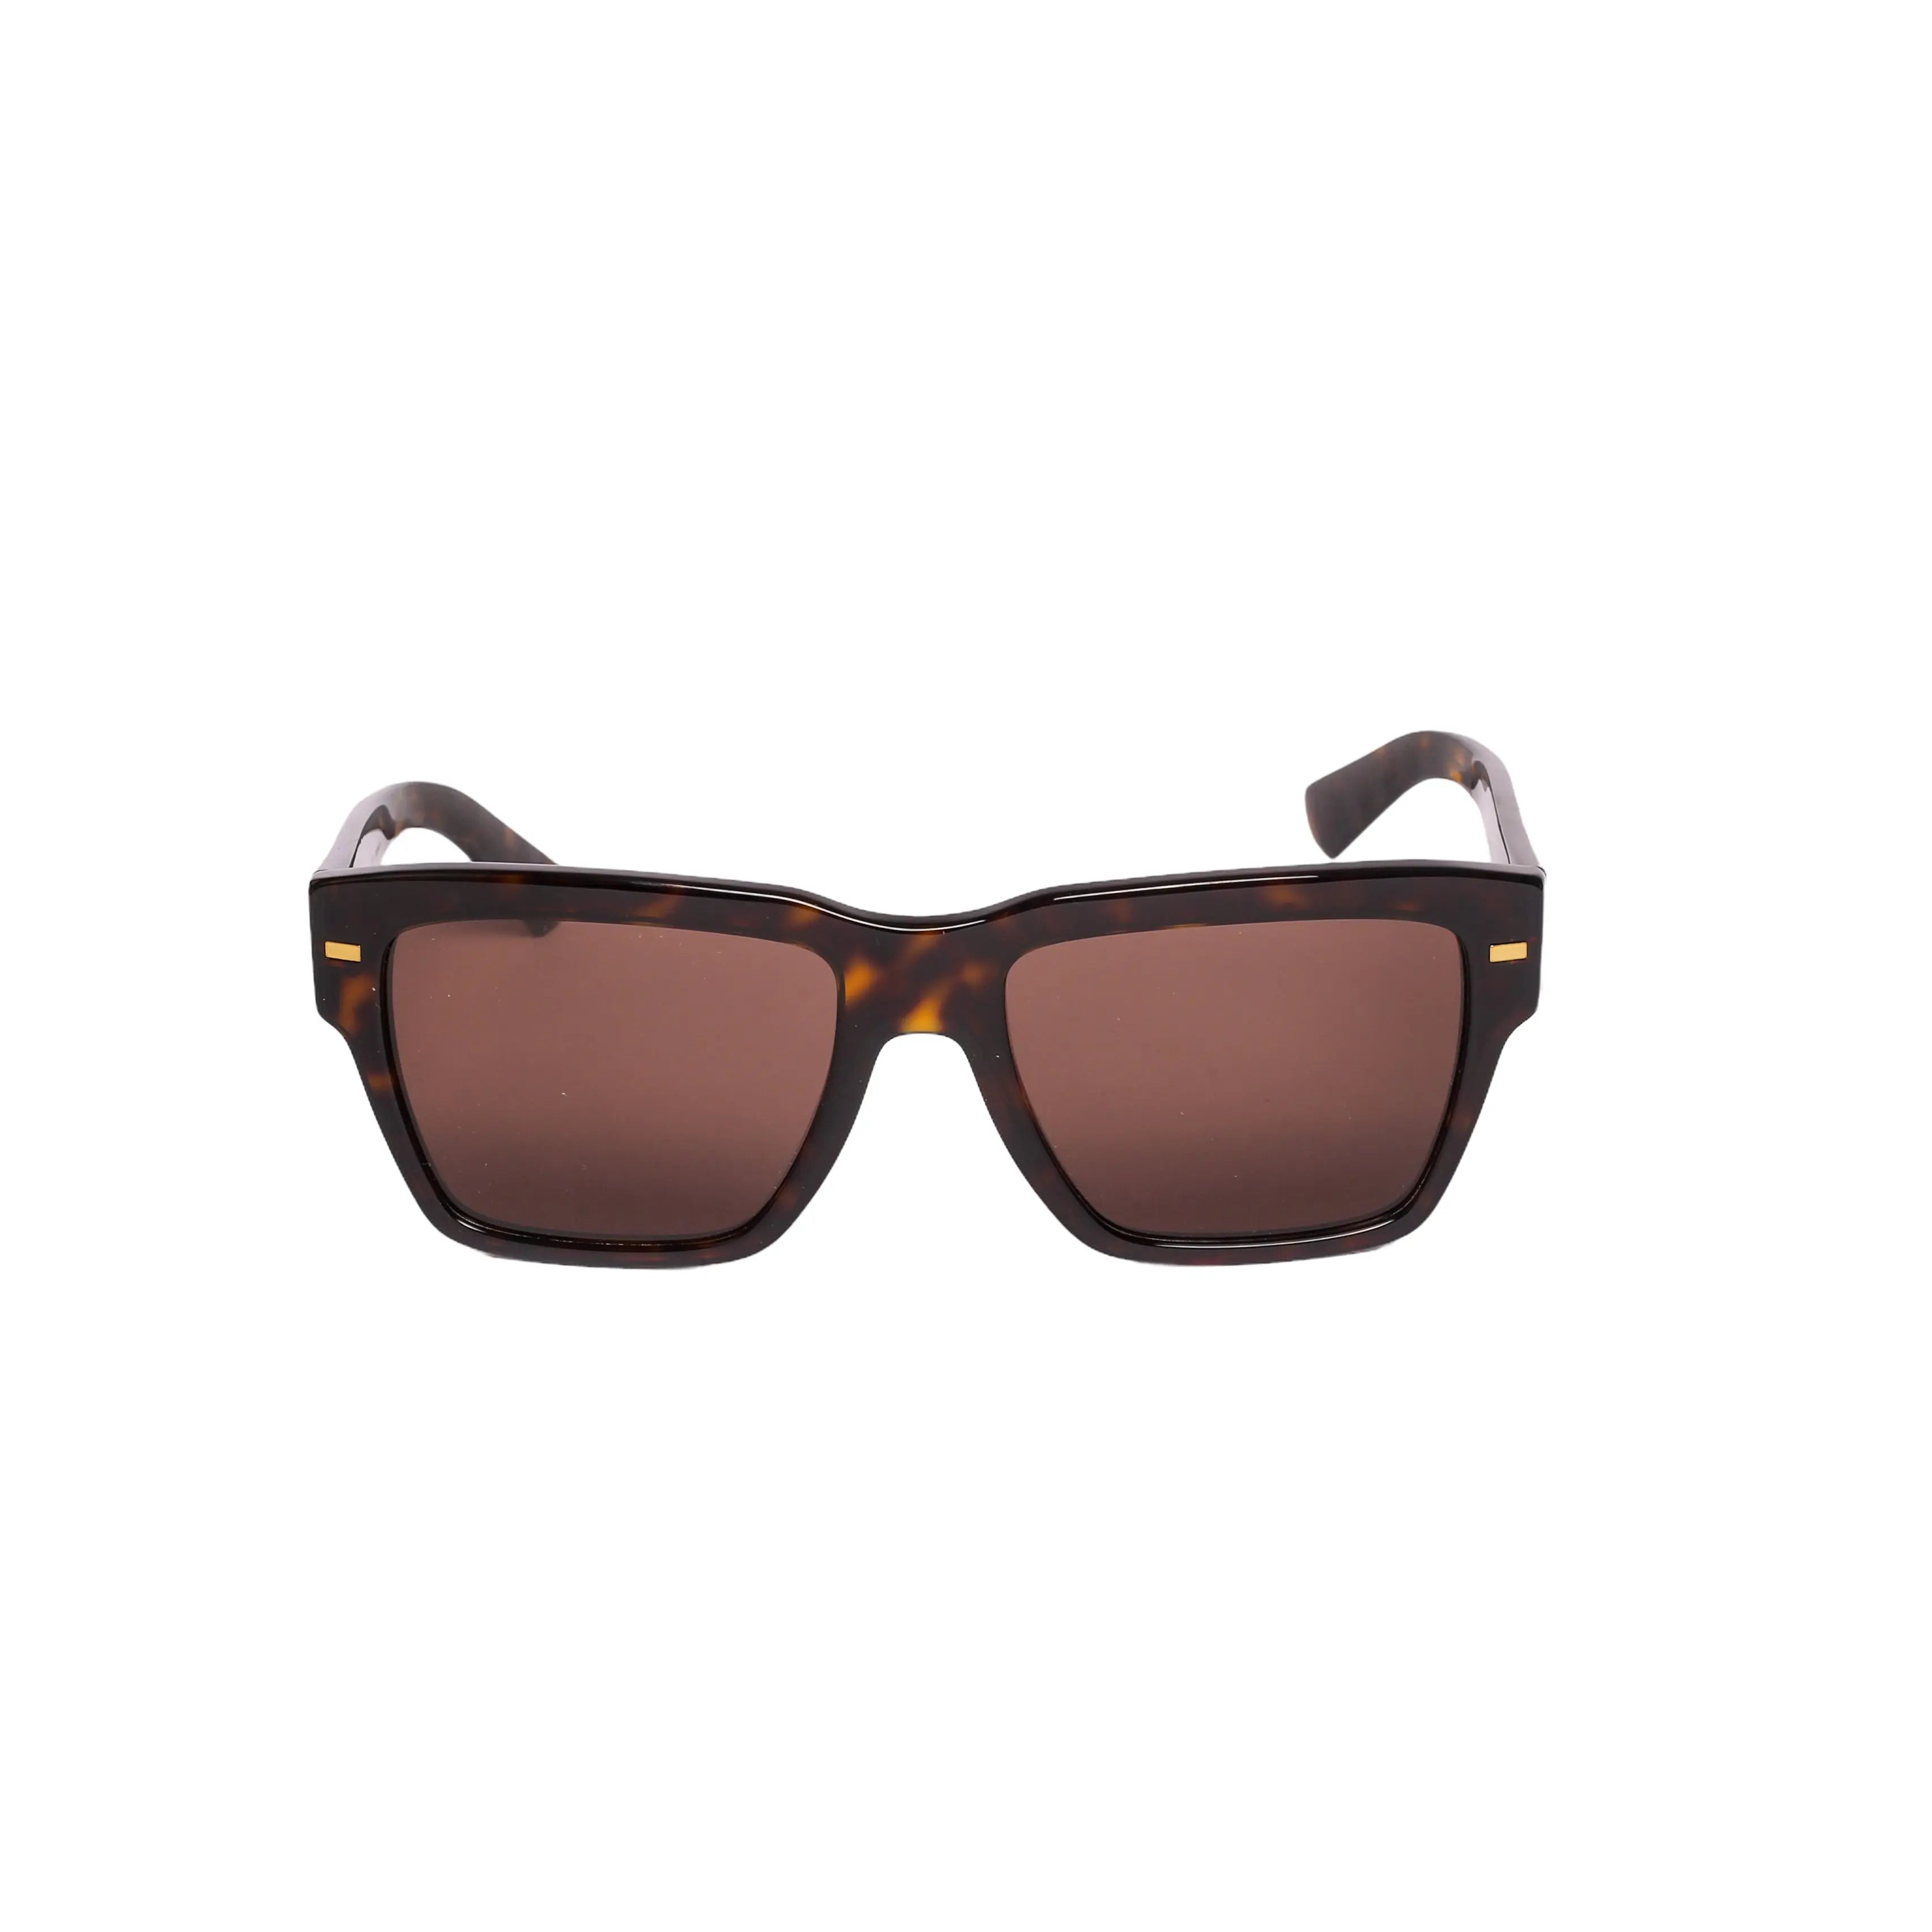 Dolce & Gabbana (D&G) DG 4431-55-502/73 SunglassesWear the ultimate in sophistication and style with Dolce &amp; Gabbana's DG 4431-55-502/73 Sunglasses. Crafted from exquisite Tortoise Acetate and featuring UV400 prSunglasses